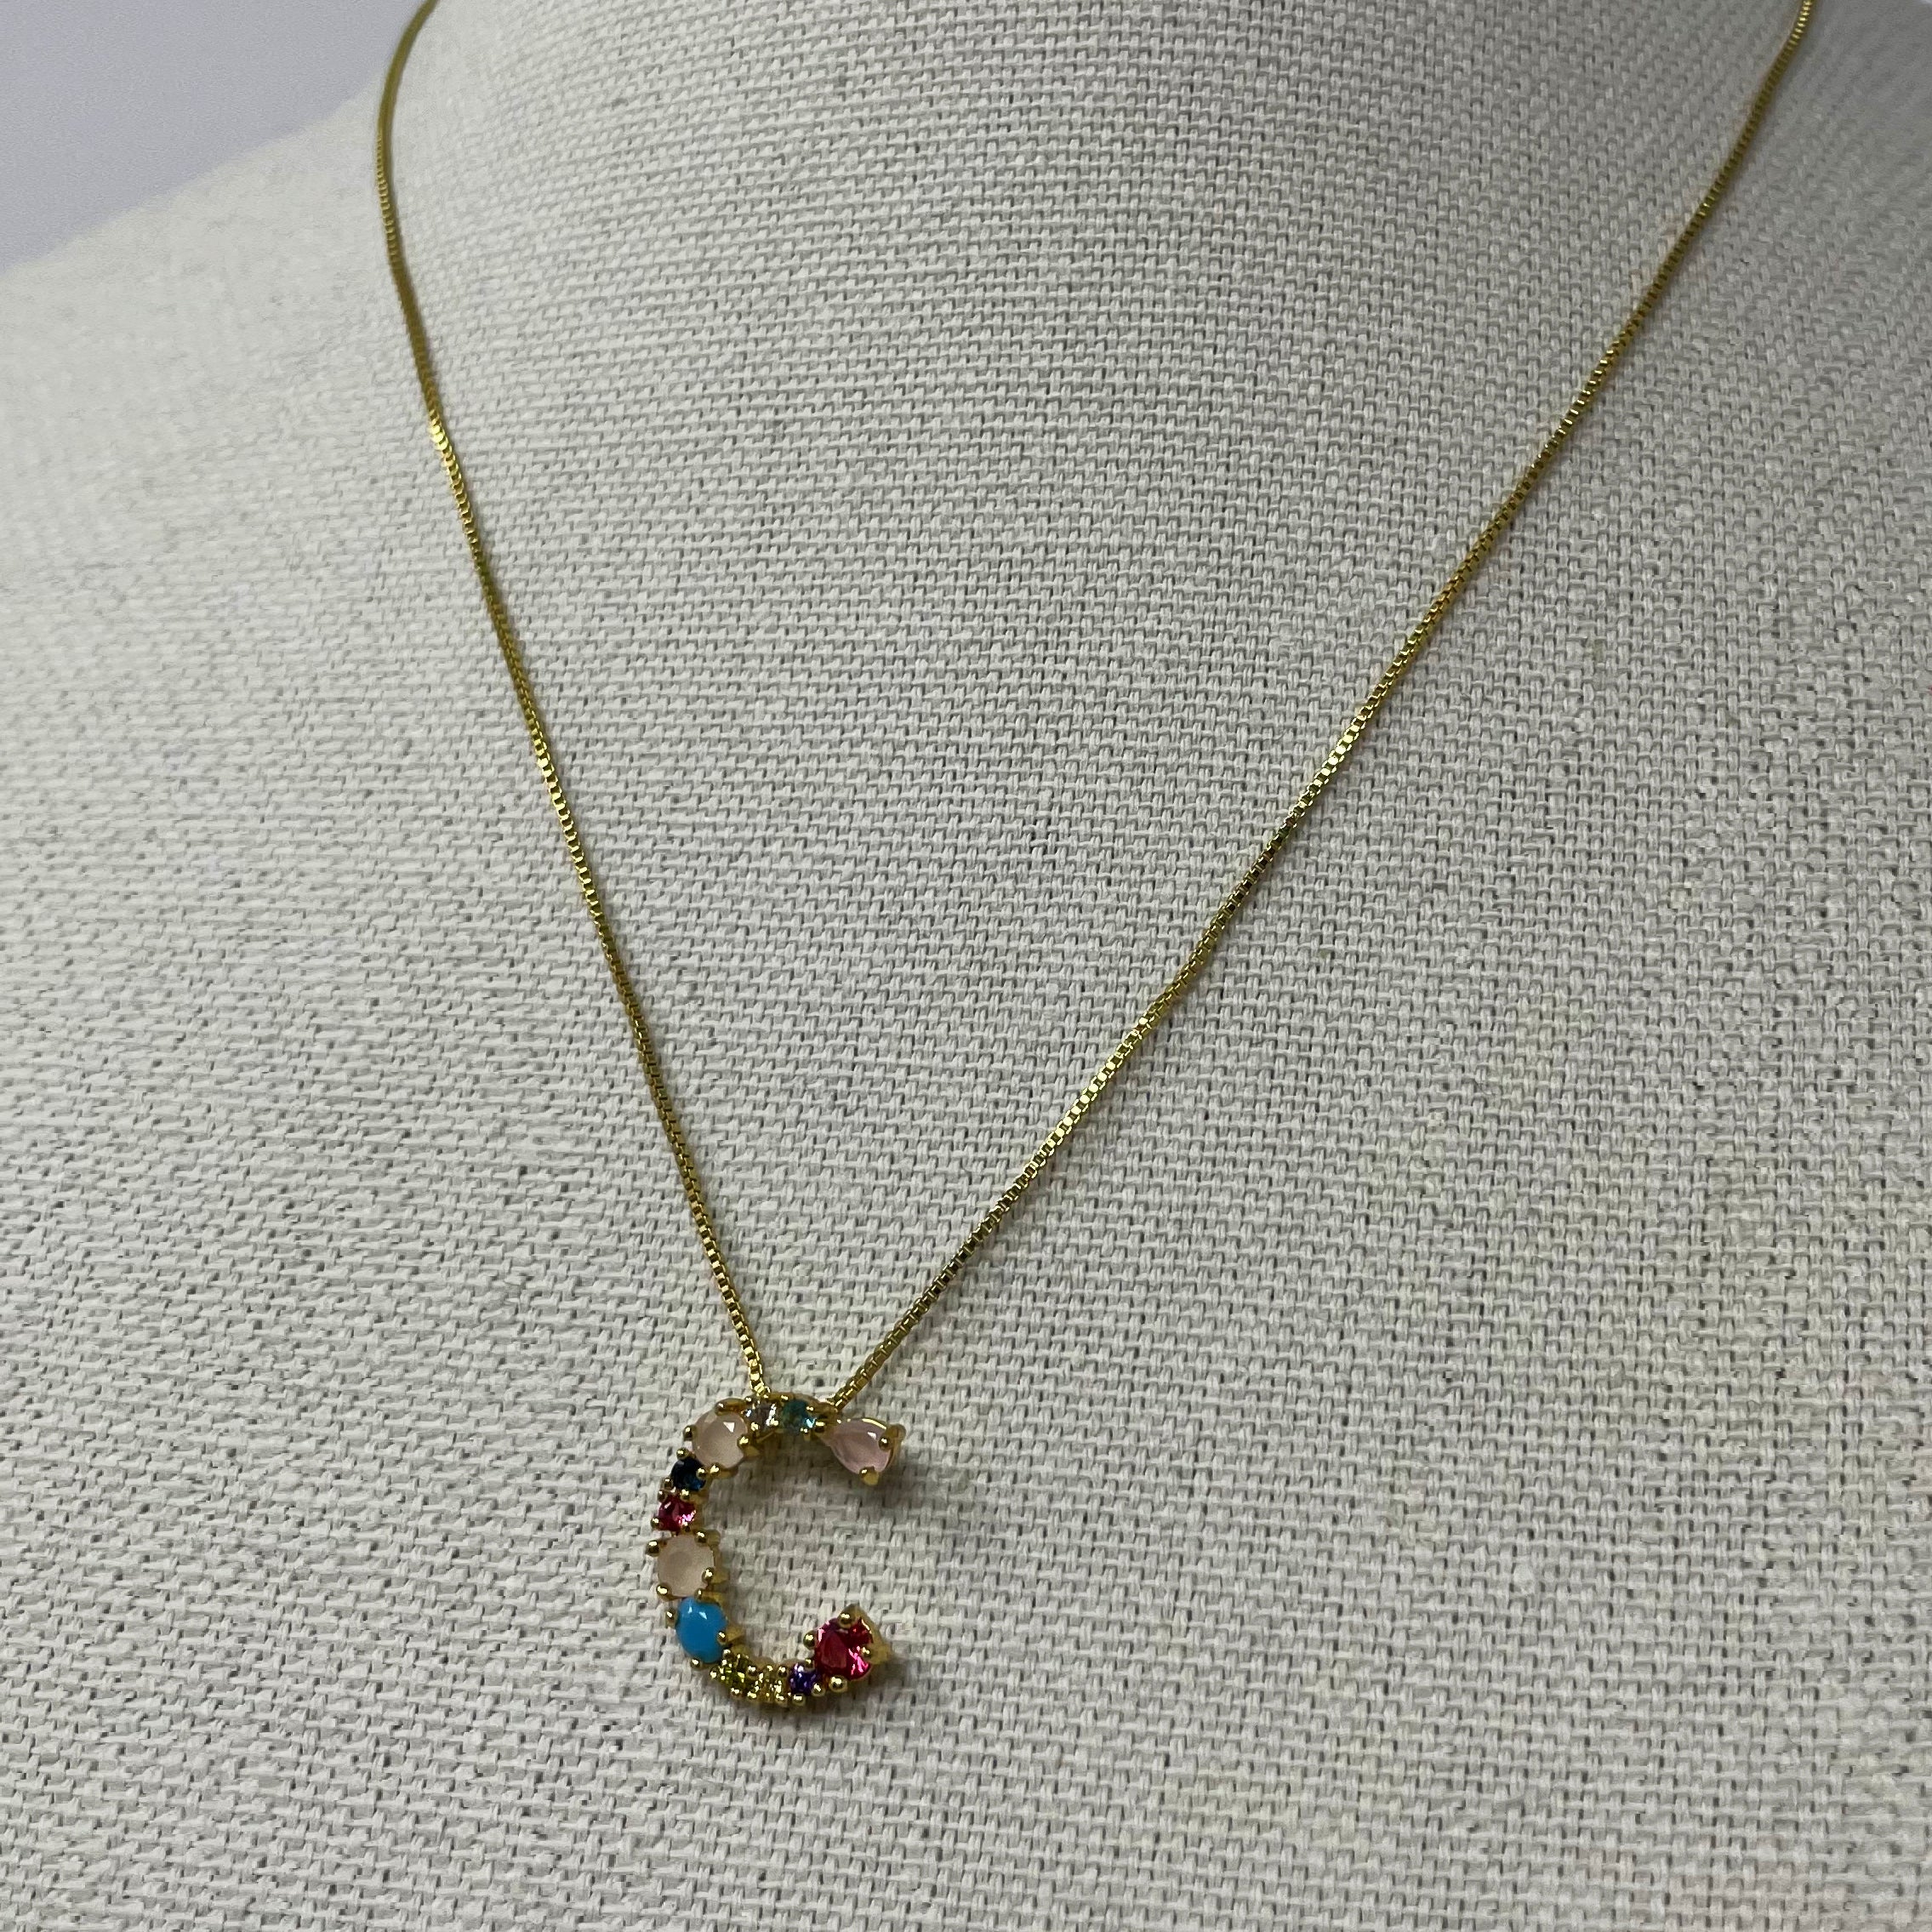 Gems Letter - Colorful Rhinestone Necklace